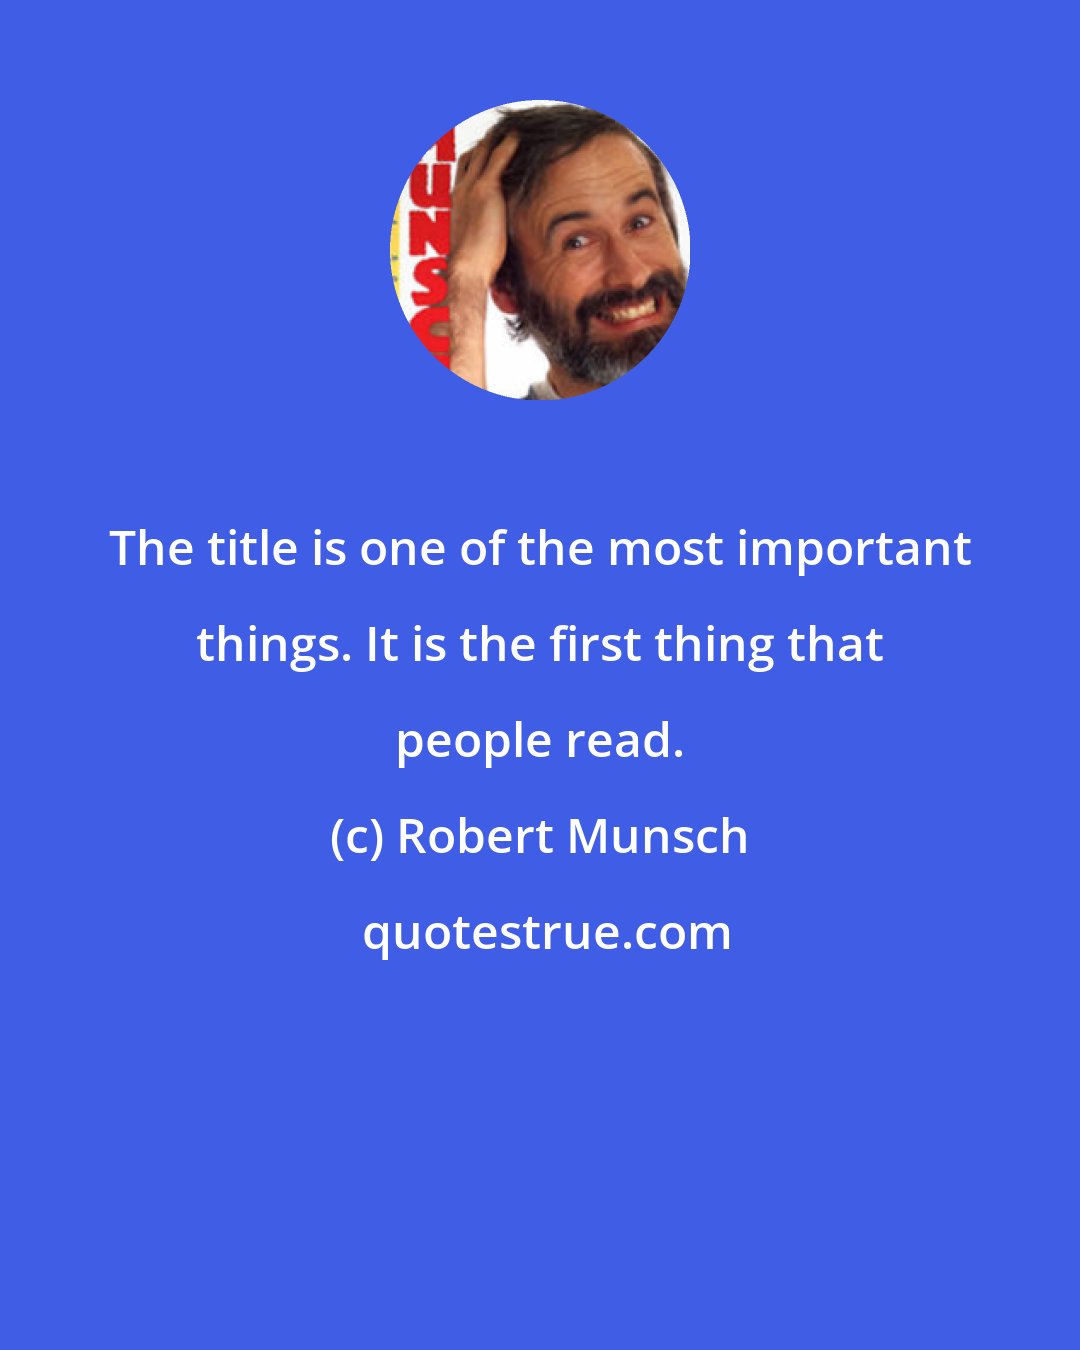 Robert Munsch: The title is one of the most important things. It is the first thing that people read.